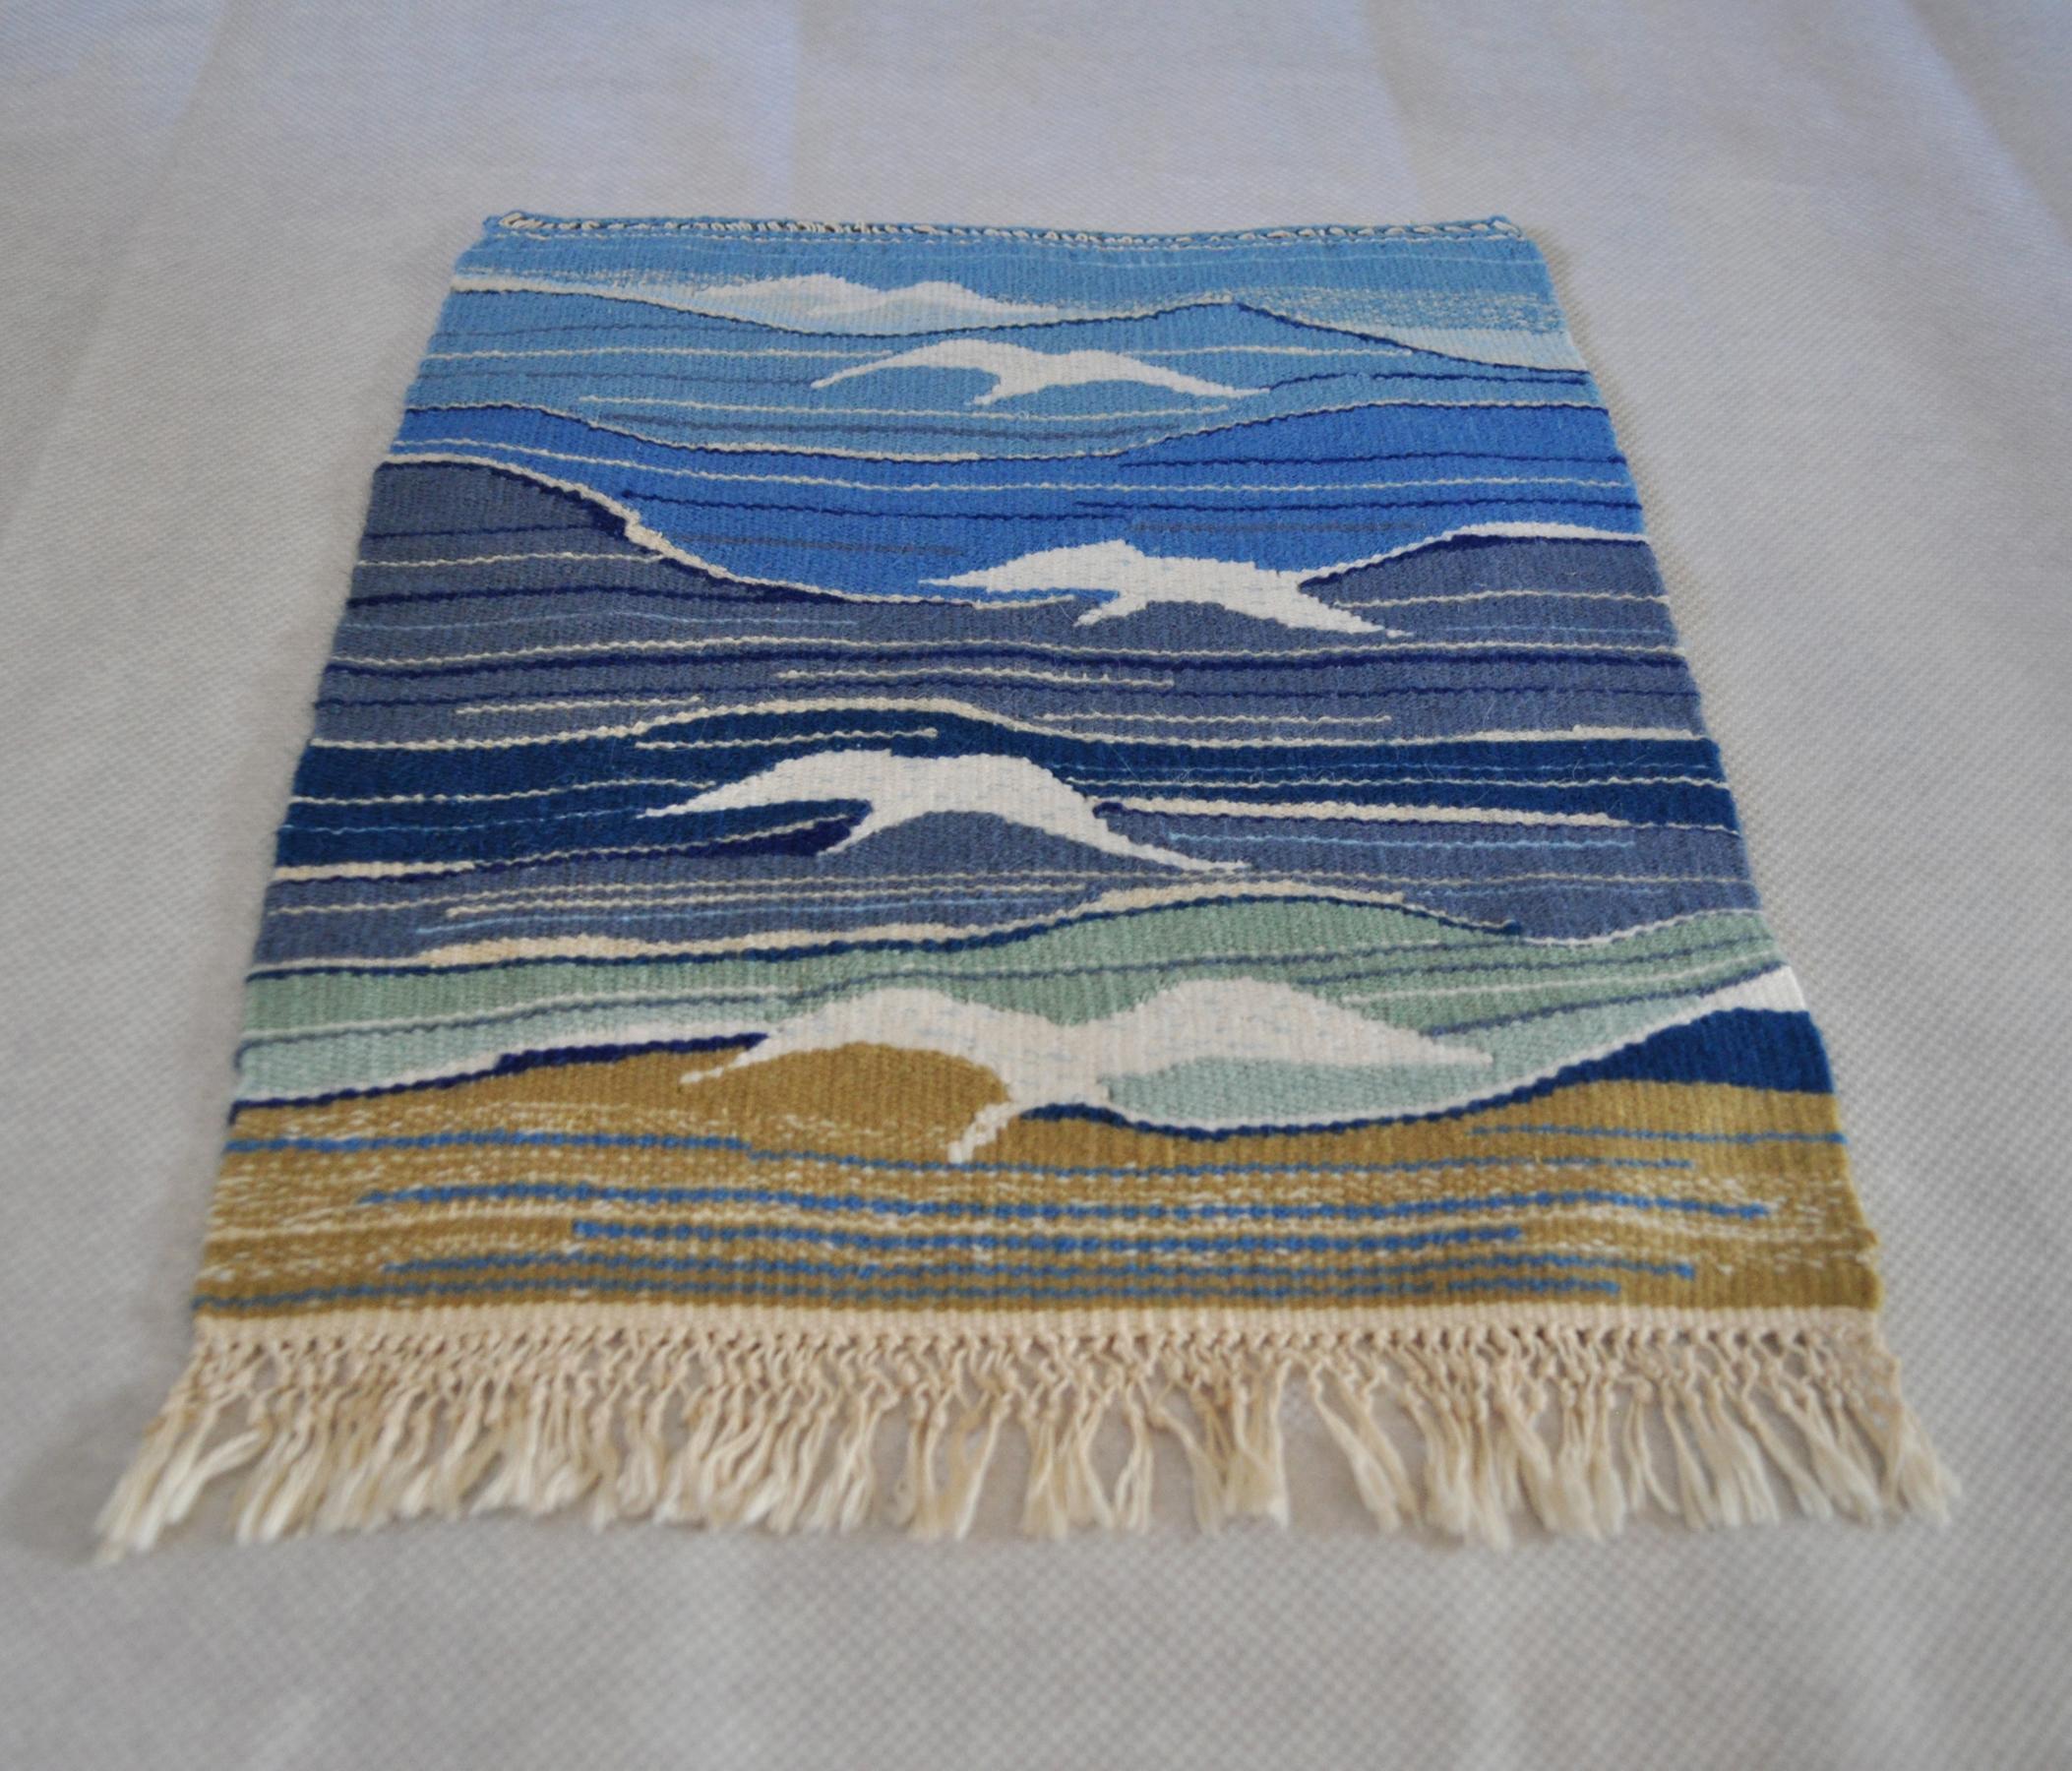 Handwoven Scandinavian vintage tapestry from the 1960s-70s.
Designer unknown.
Handwoven wool on linen warp. Can be framed.

Dimensions: 34 W x 42 H cm